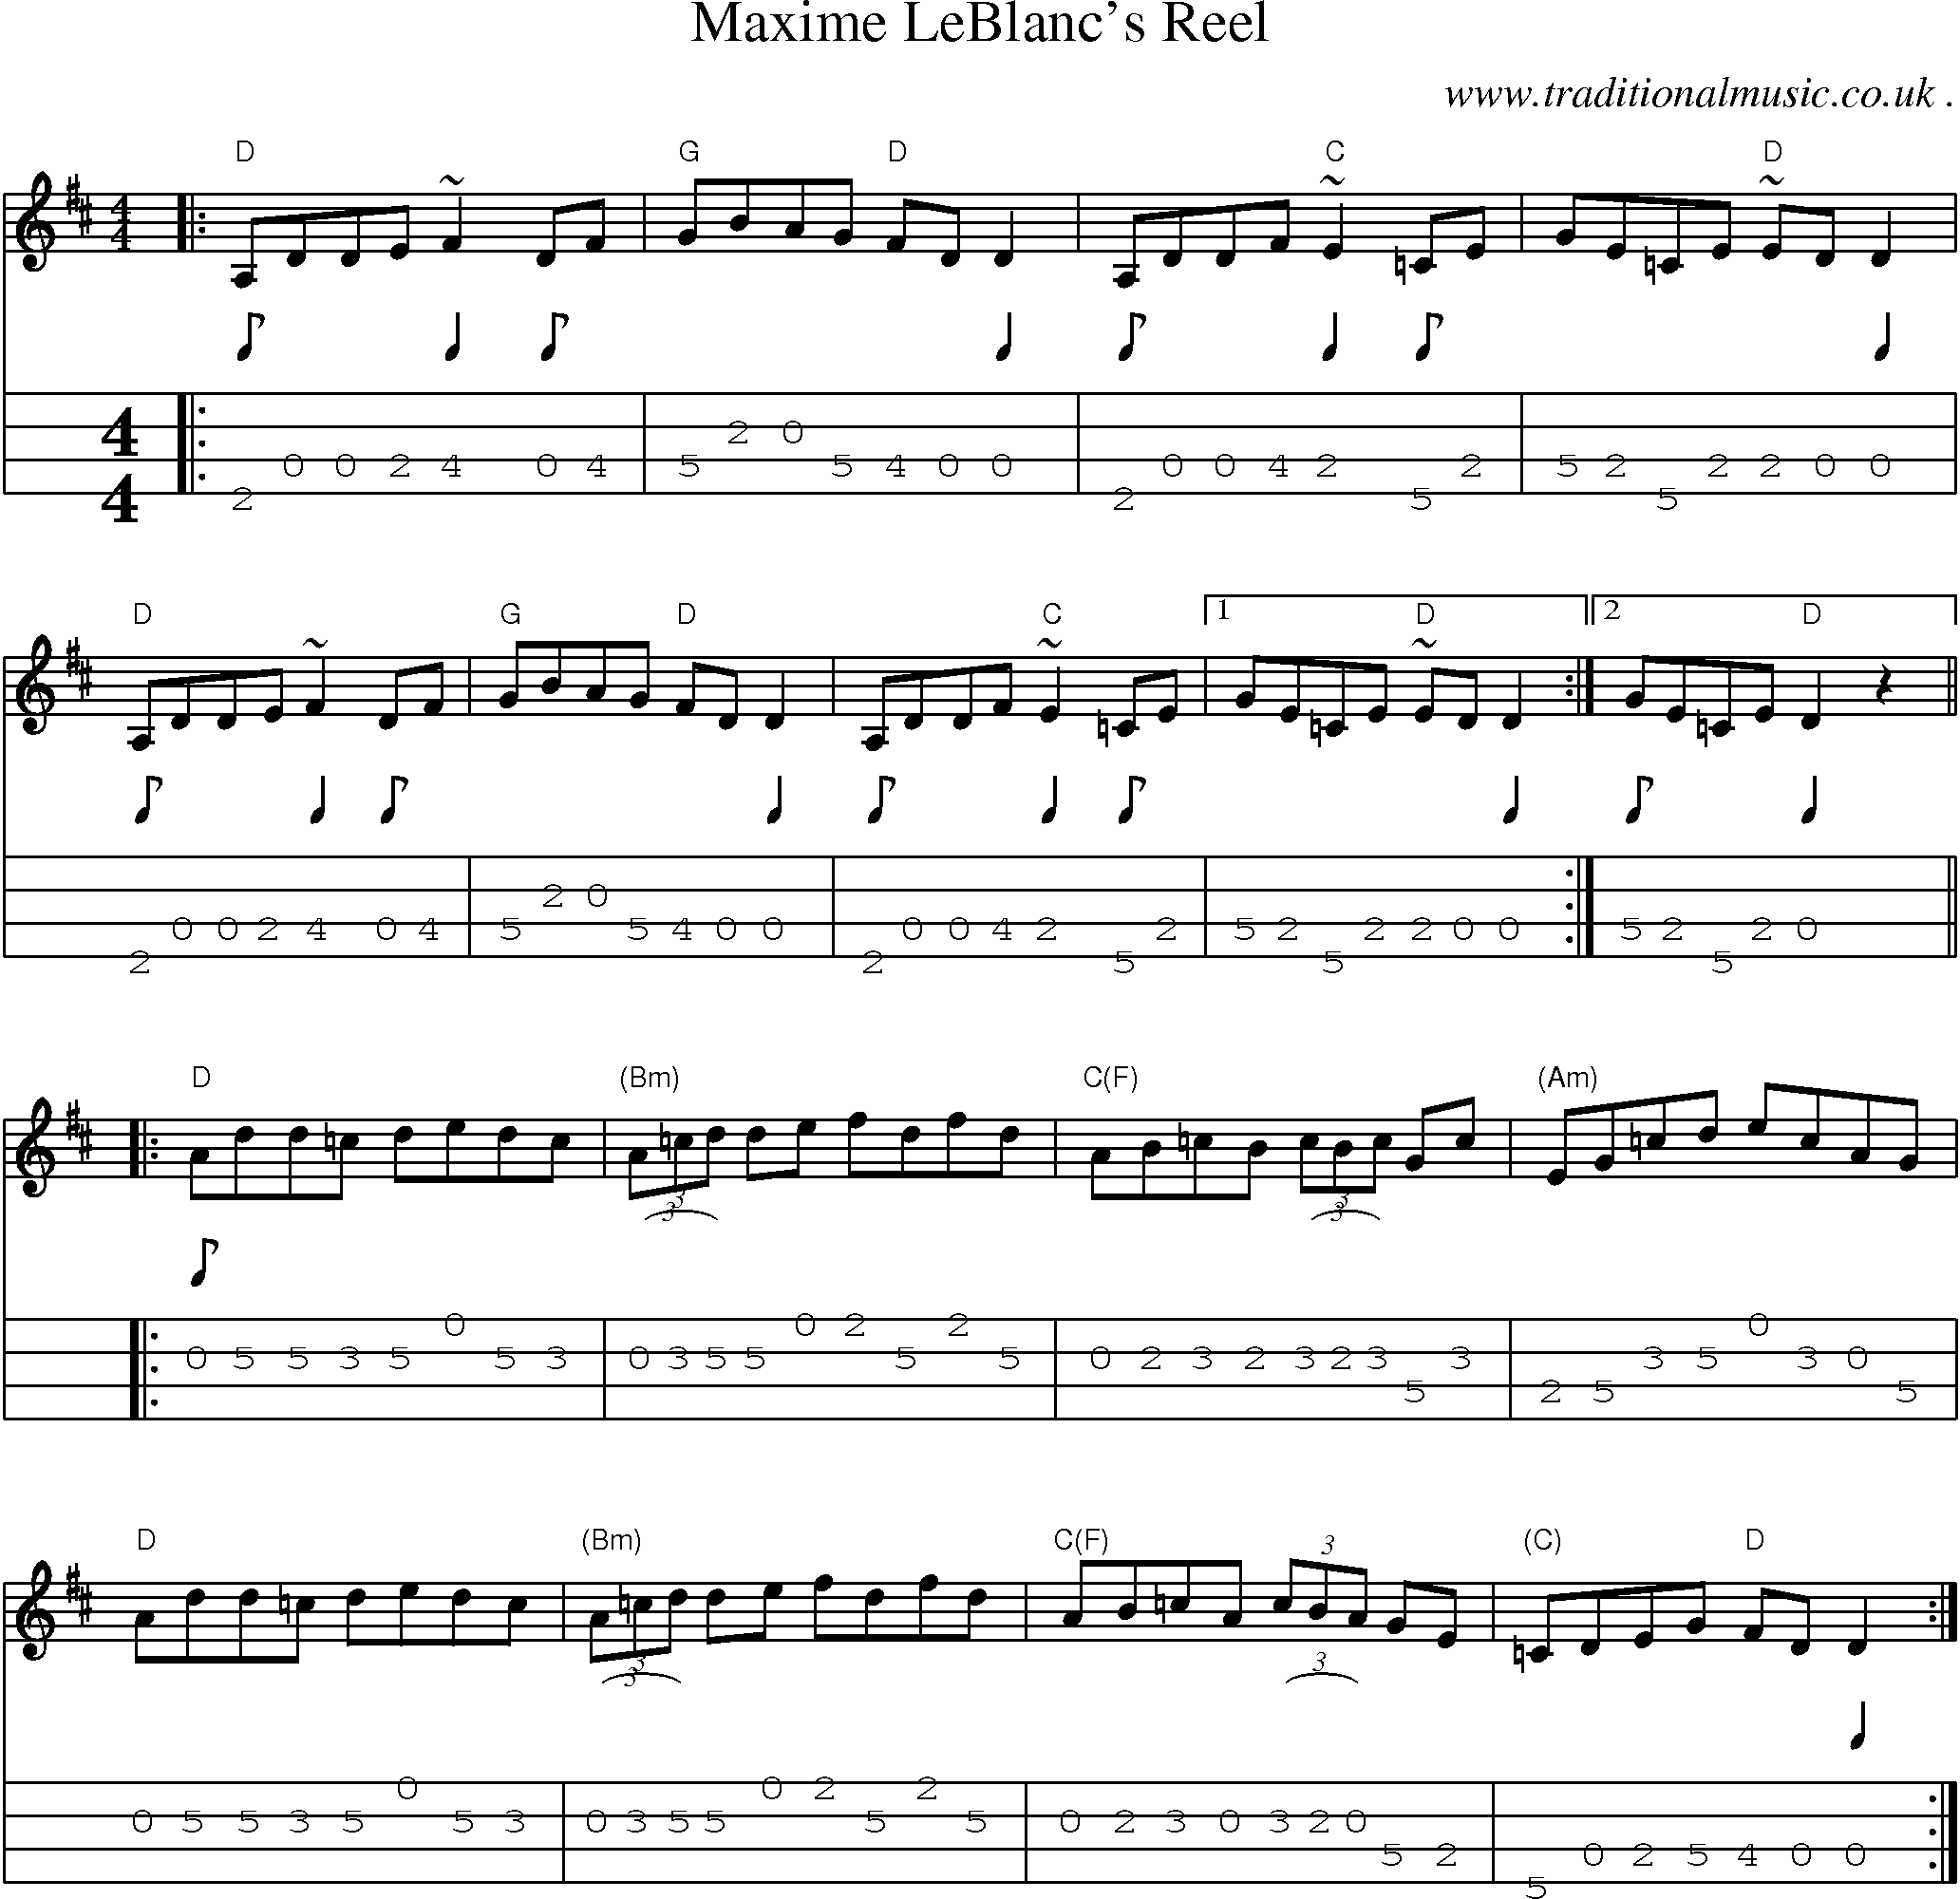 Music Score and Guitar Tabs for Maxime Leblancs Reel